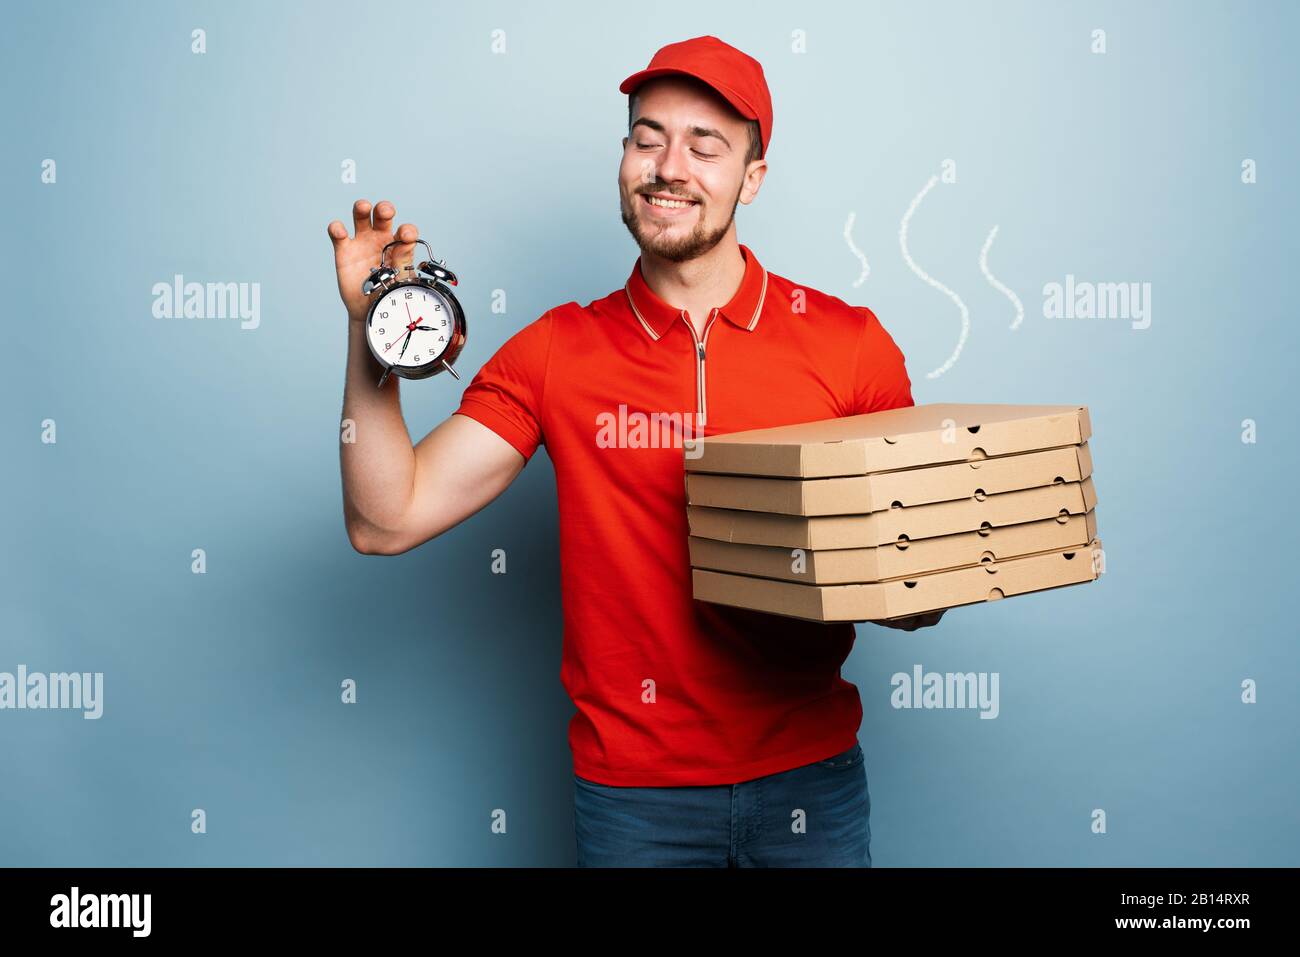 Courier is punctual to deliver quickly pizzas. Cyan background Stock Photo